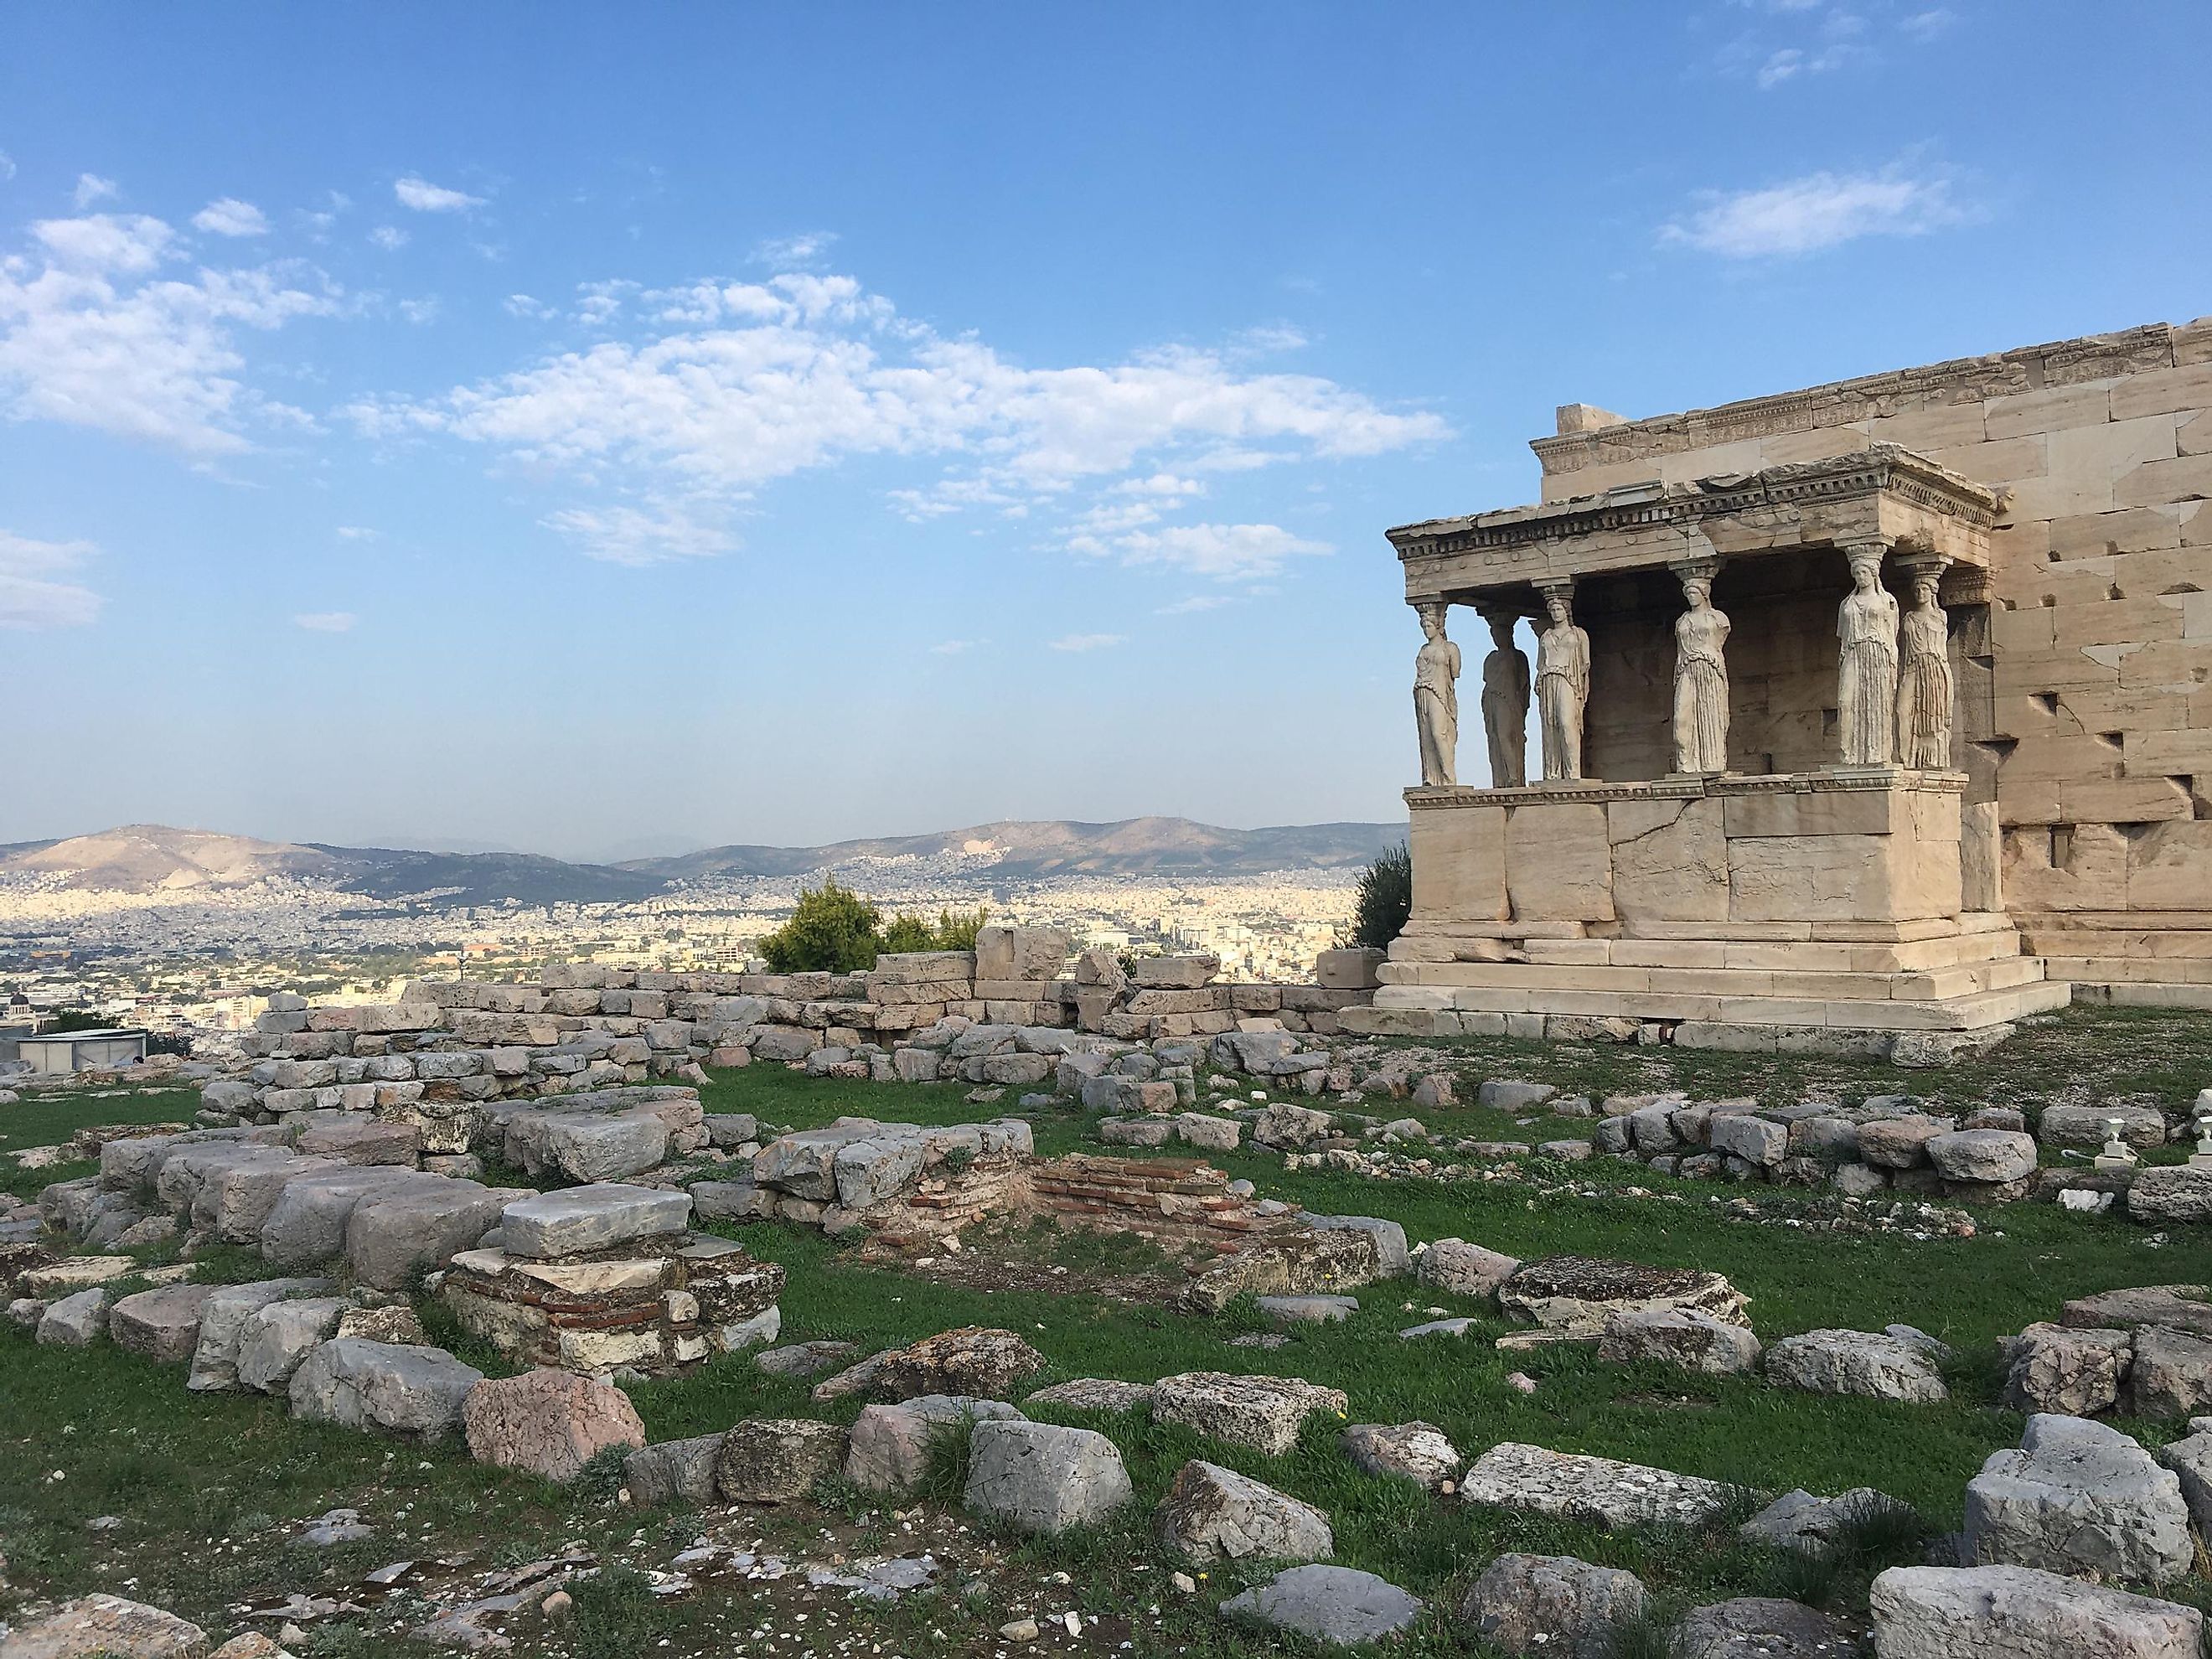 Part of the Erechtheion (or Temple of Athena Polias) standing above some rocky ruins, and well above the rest of Athens. The Acropolis was blessed with blue skies on this morning. Image: Andrew Douglas